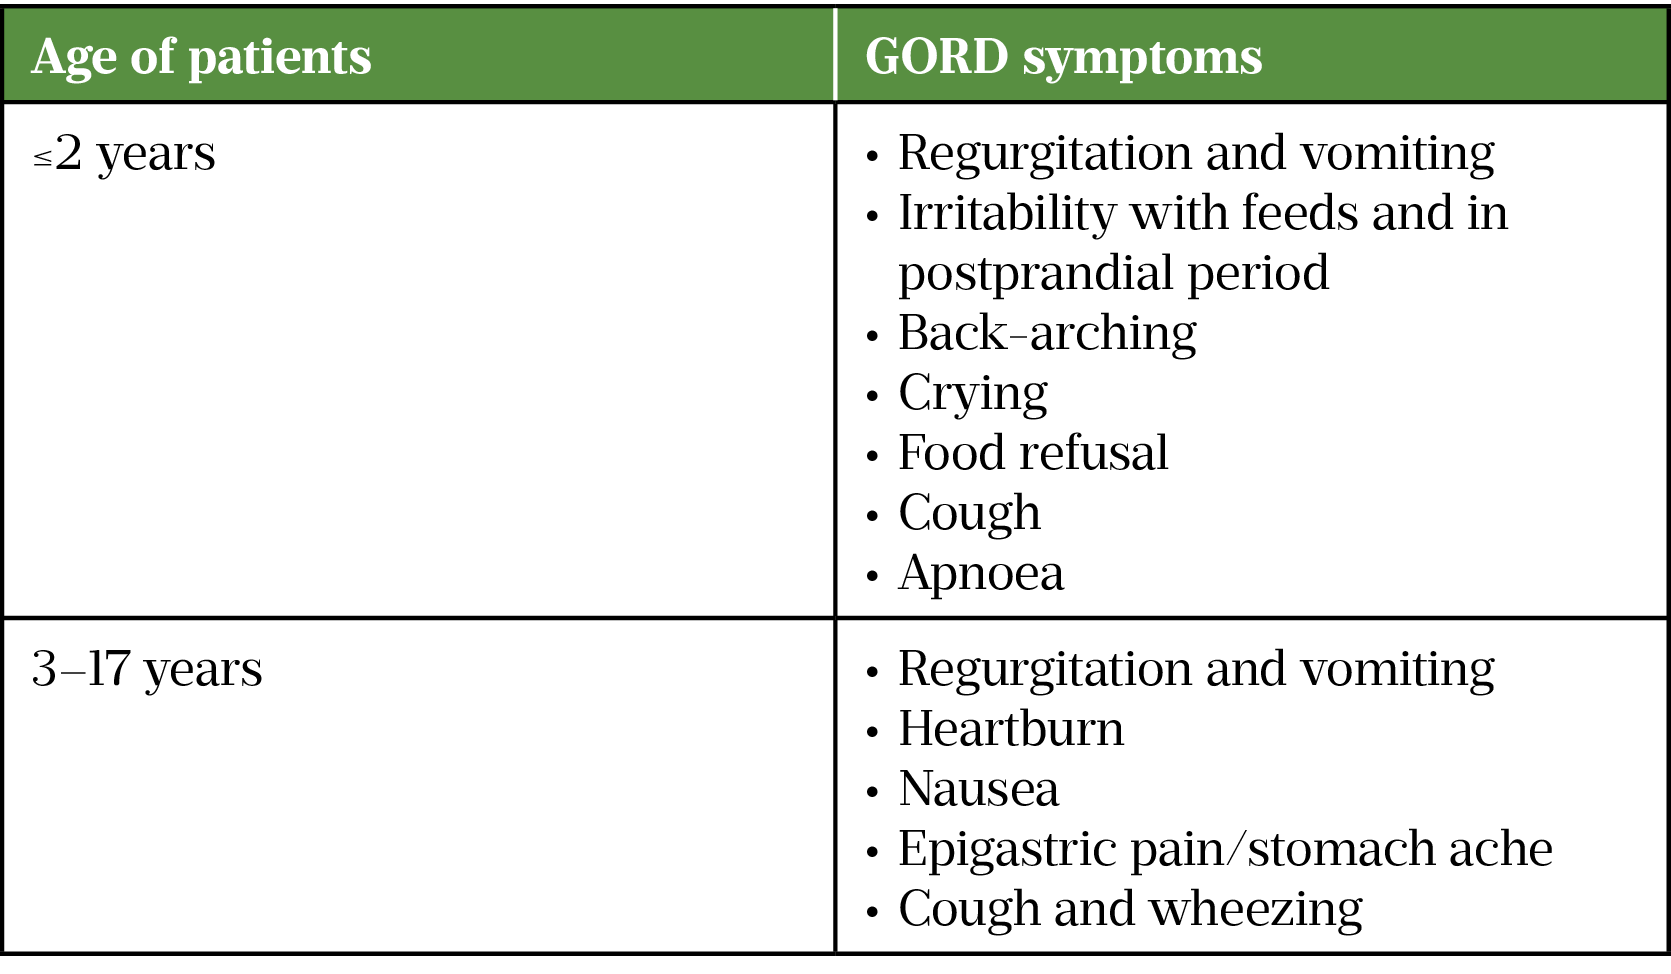 Table 1: Age-related symptoms of gastro-oesophageal reflux disease